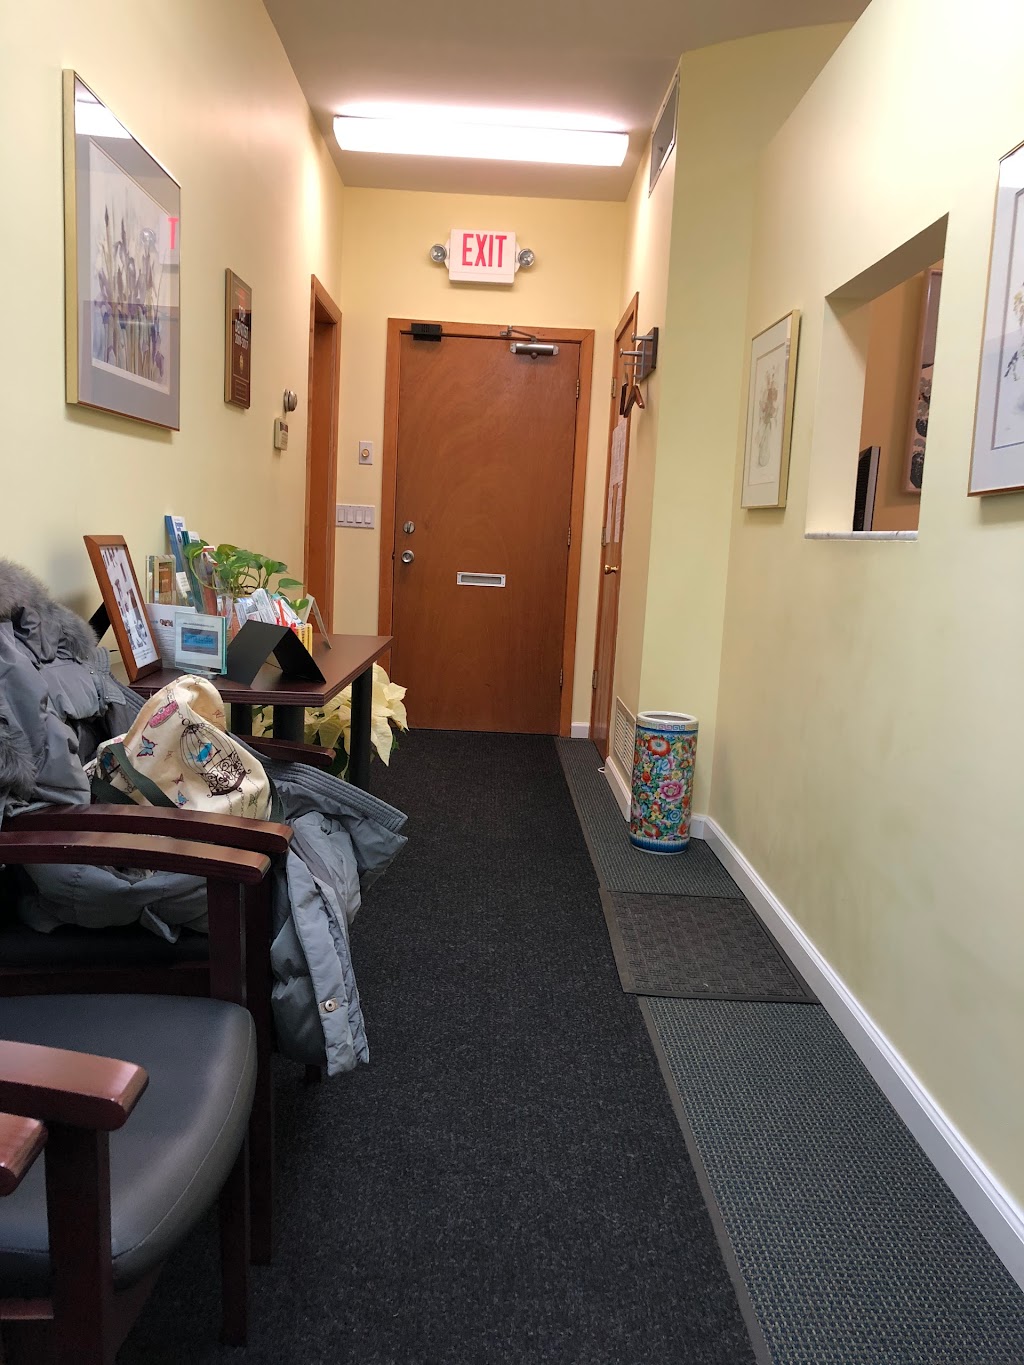 Valley Endodontics | 425 N State Rd # 1, Briarcliff Manor, NY 10510 | Phone: (914) 762-0990